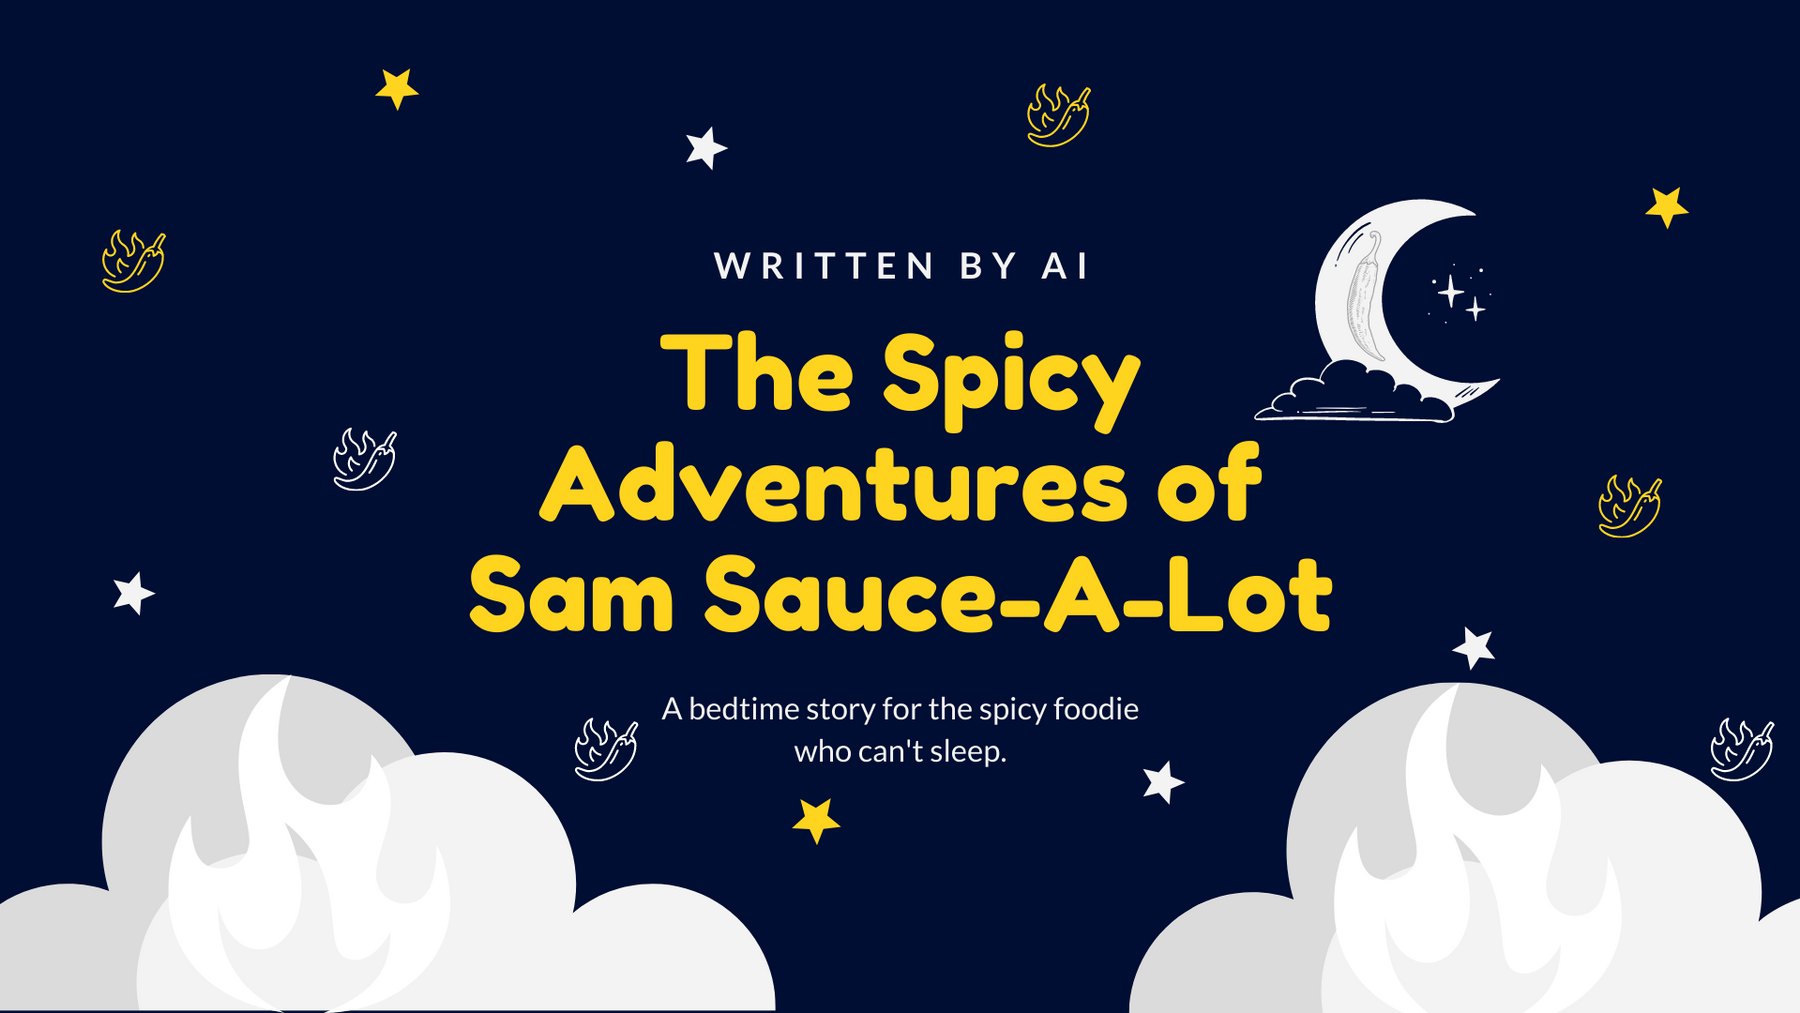 The Spicy Adventures of Sam Sauce-A-Lot